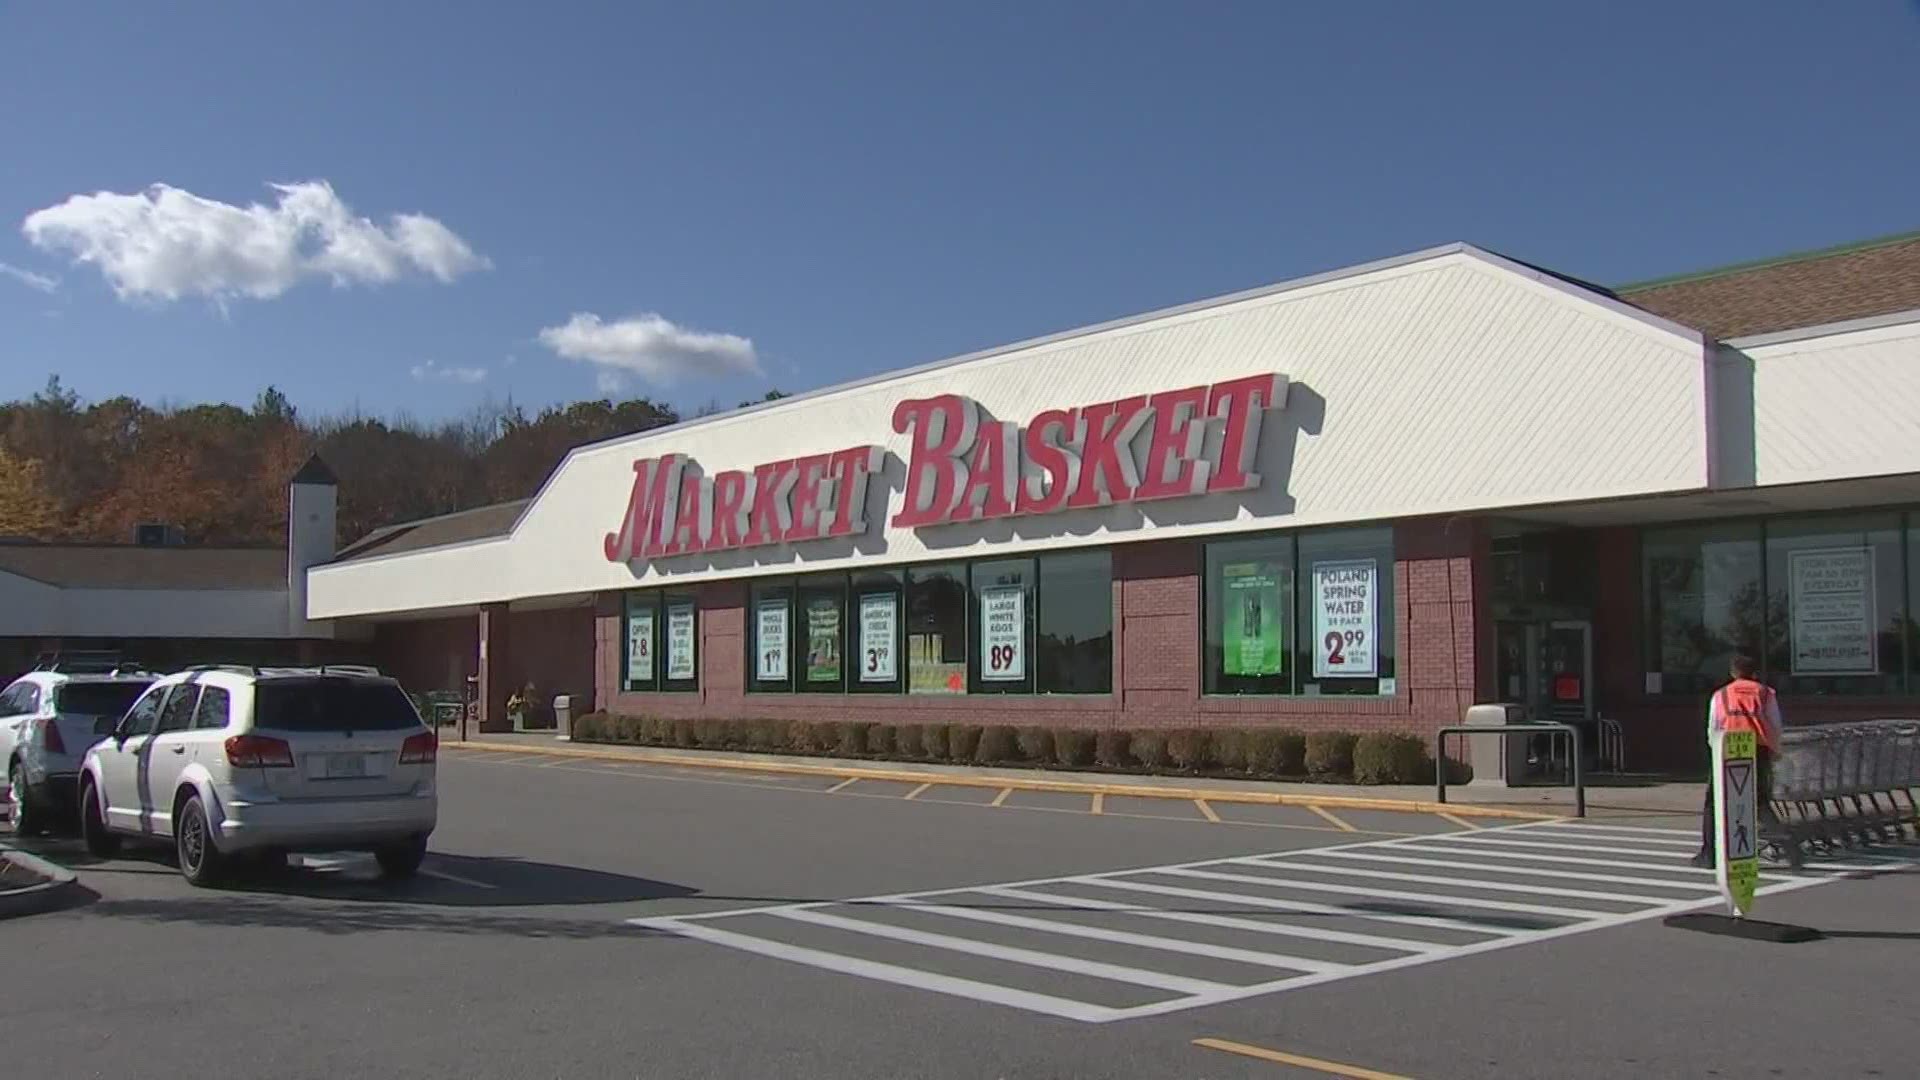 Stores went into lockdown after a 27-year-old Maine man allegedly fired shots in the parking lot.